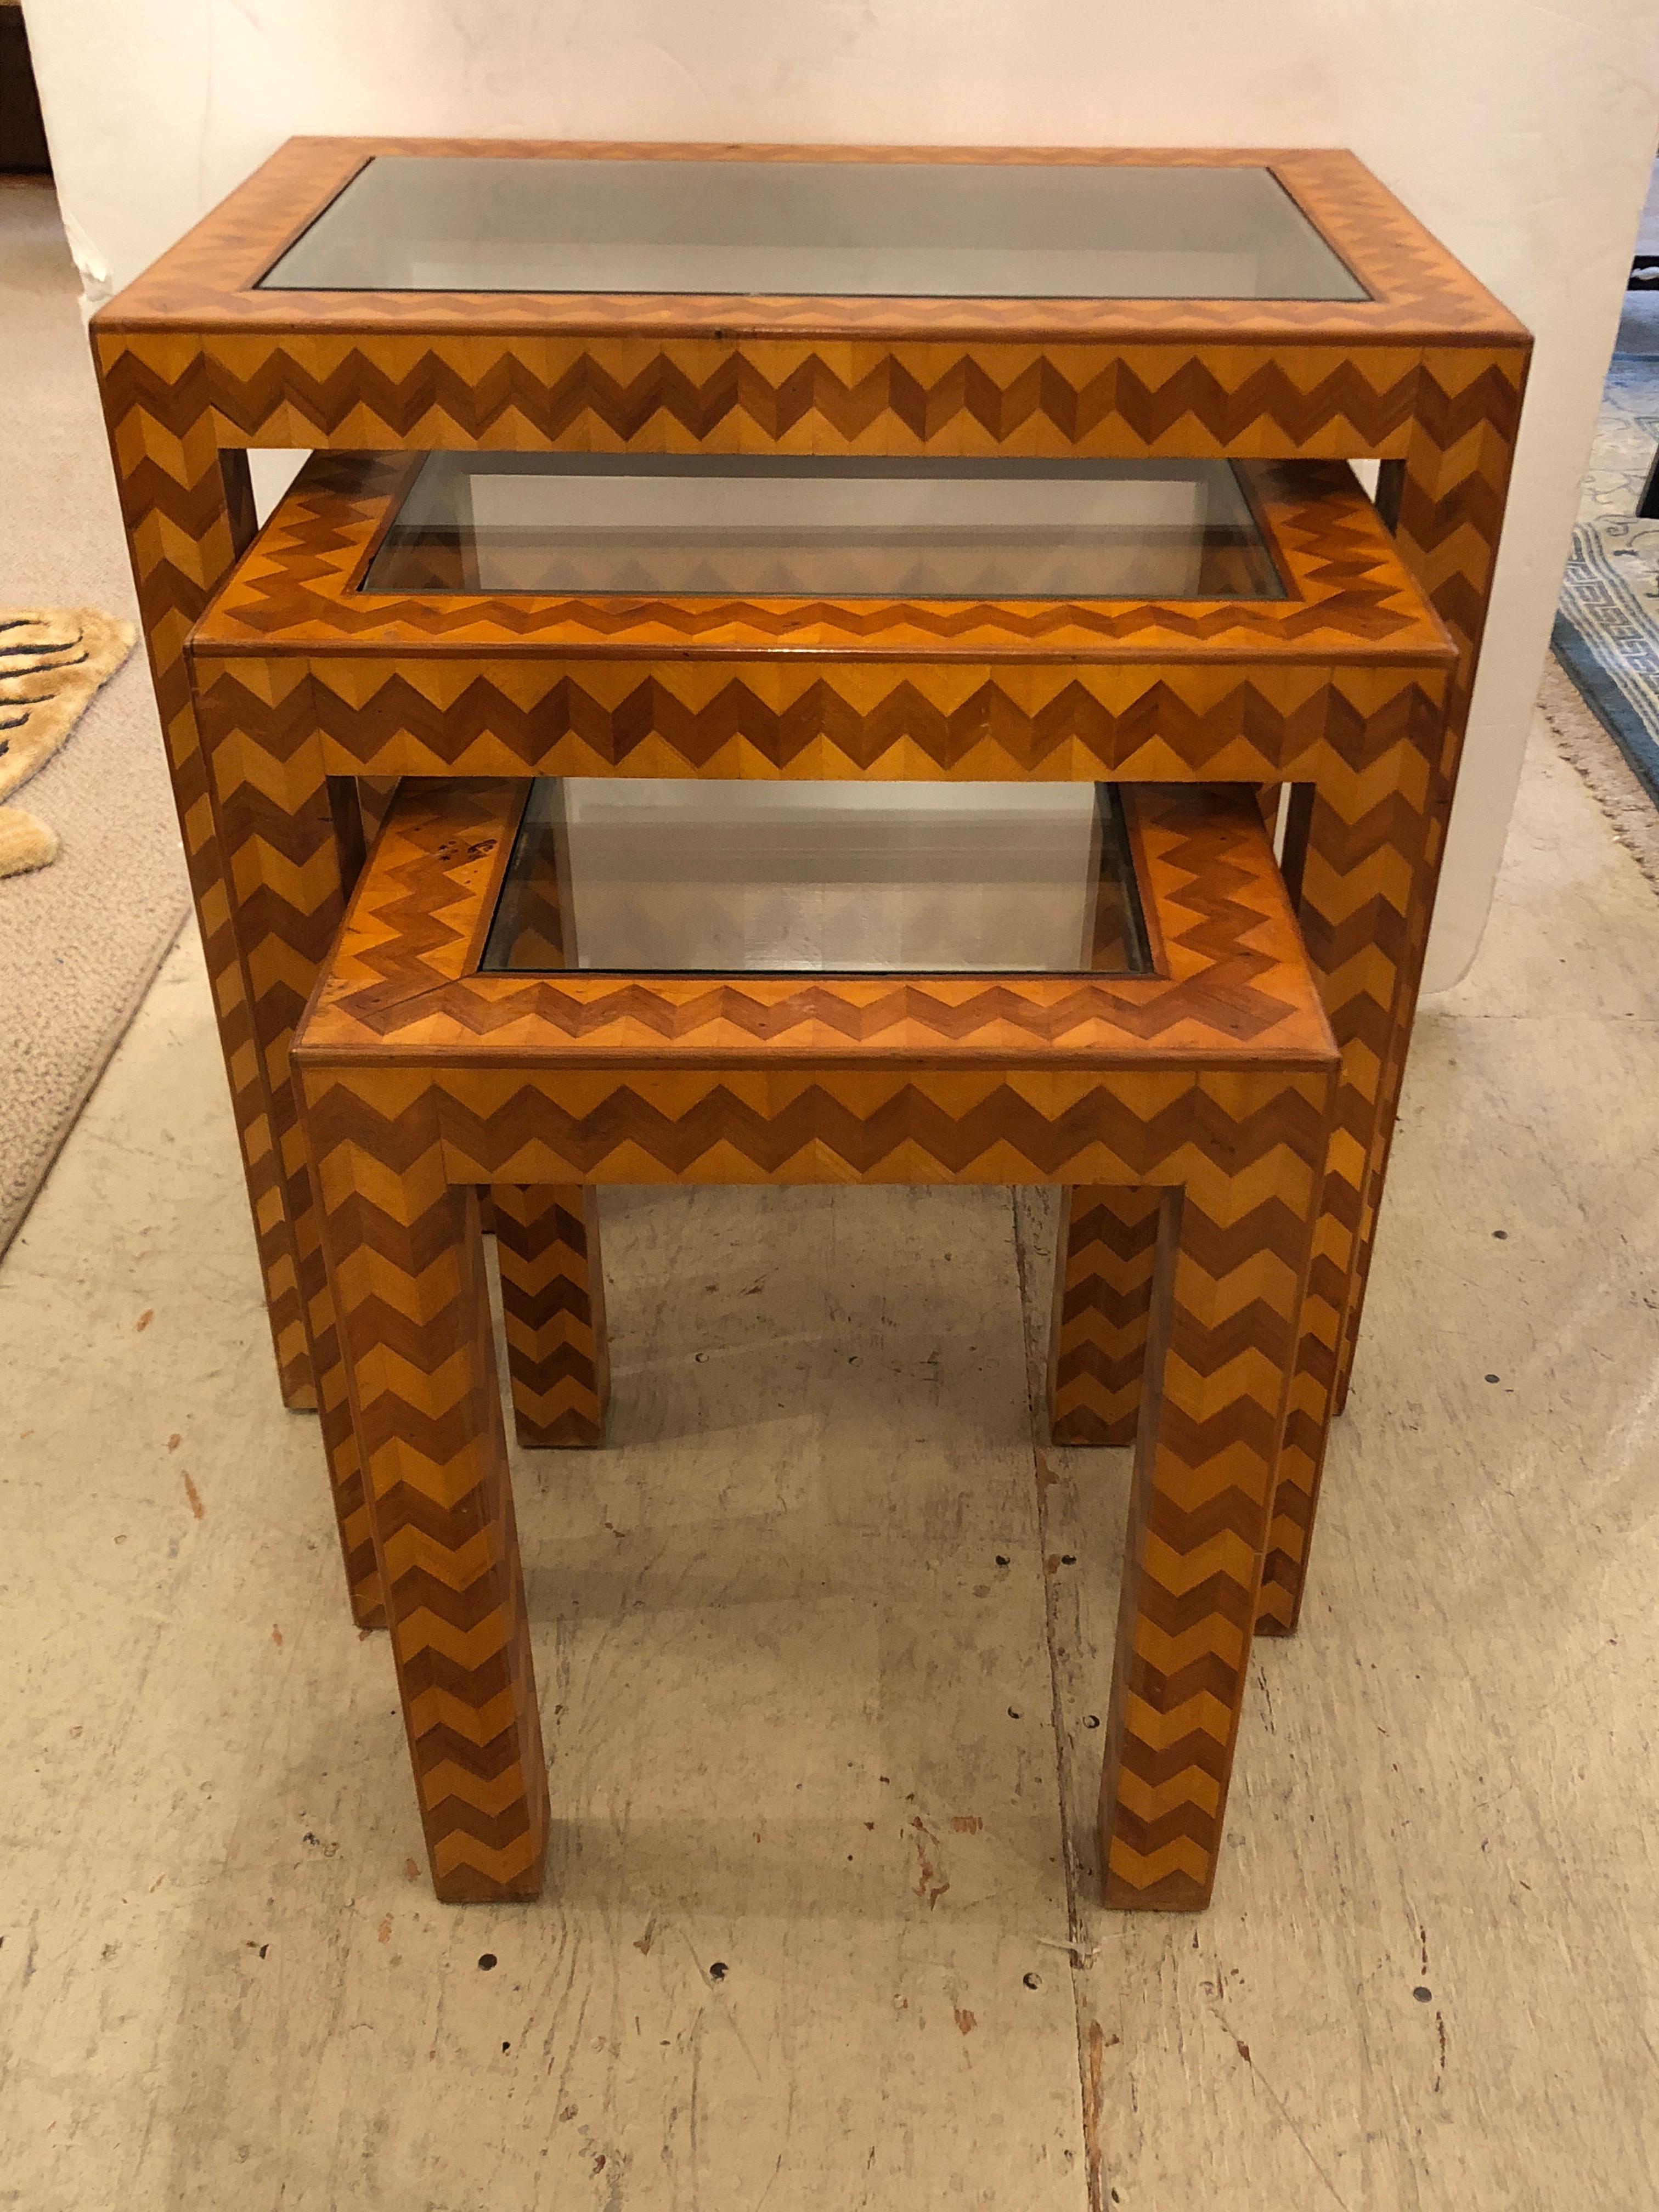 Gorgeous set of 3 Italian nesting tables that have an eye-catching decorative zig zag pattern with mahogany and satinwood marquetry.
Little table measures: 13.75 x 13.5 x 17.75
Medium 18.75 x 15 x 20.75
Largest 23.75 x 16.25 x 23.5.